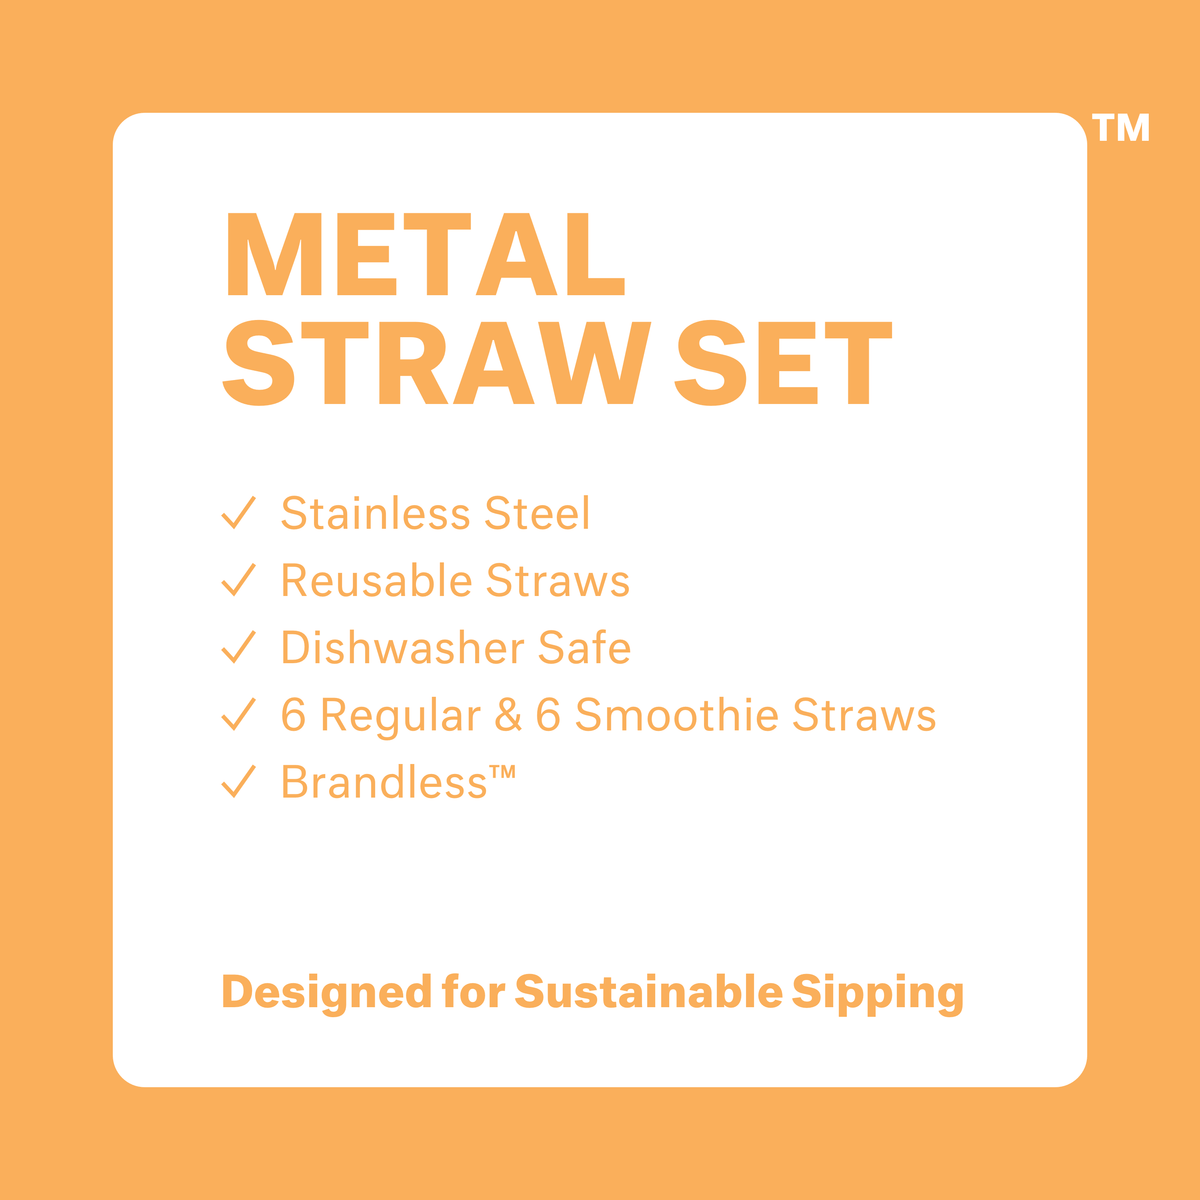 Metal Straw Set: stainless steel, reusable straws, dishwasher safe, 6 regular and 6 smoothie straws. Brandless. Designed for sustainable sipping.